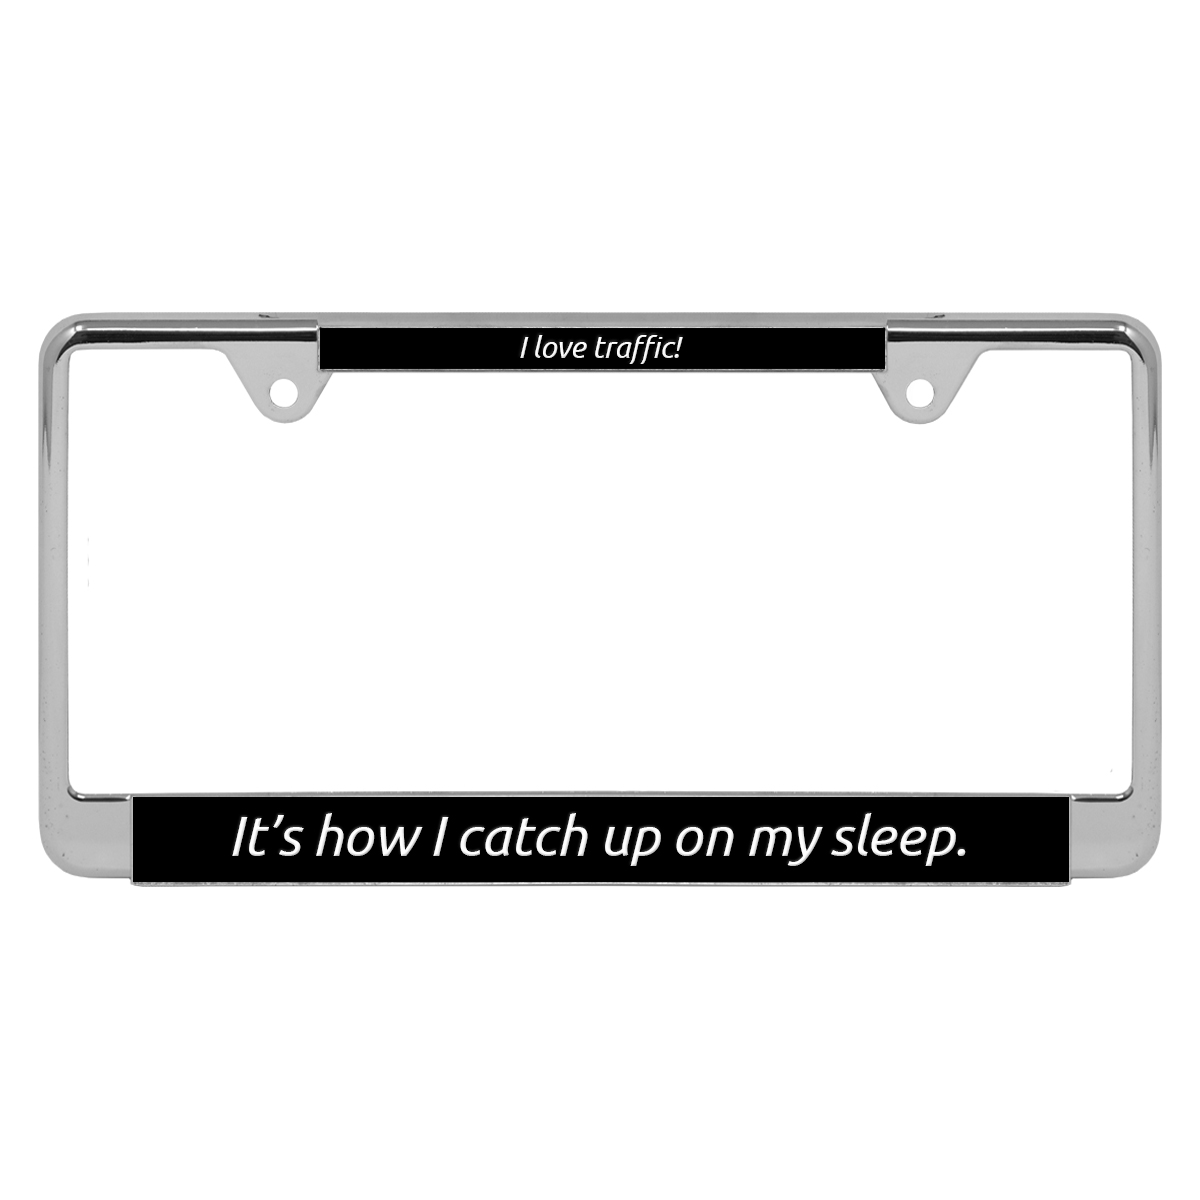 La Dolce Vita Italian Flag Metal License Plate Frame Funny,Cute License Plate Cover,Car Tags Frame,Gifts for Women,for Men 